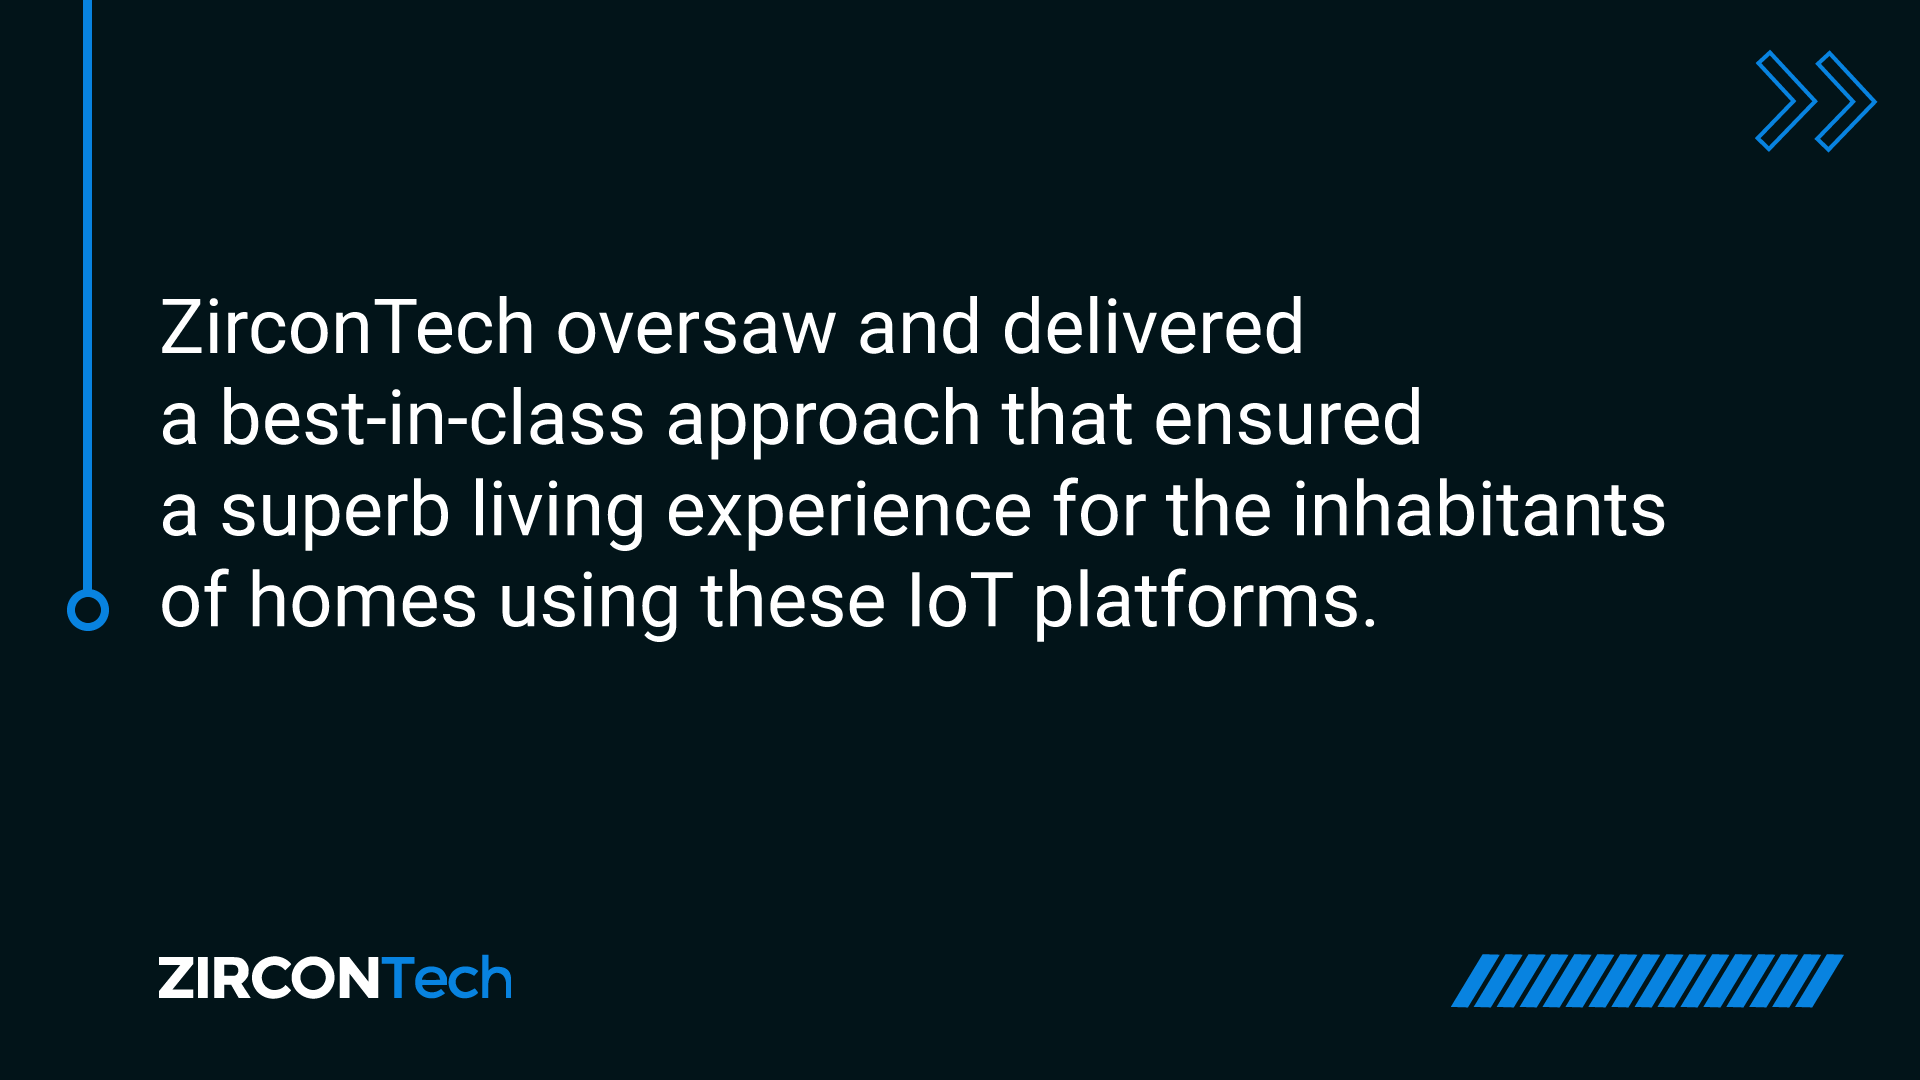 ZirconTech oversaw and delivered a best-in-class approach that ensured a superb living experience for the inhabitants of homes using these IoT platforms.